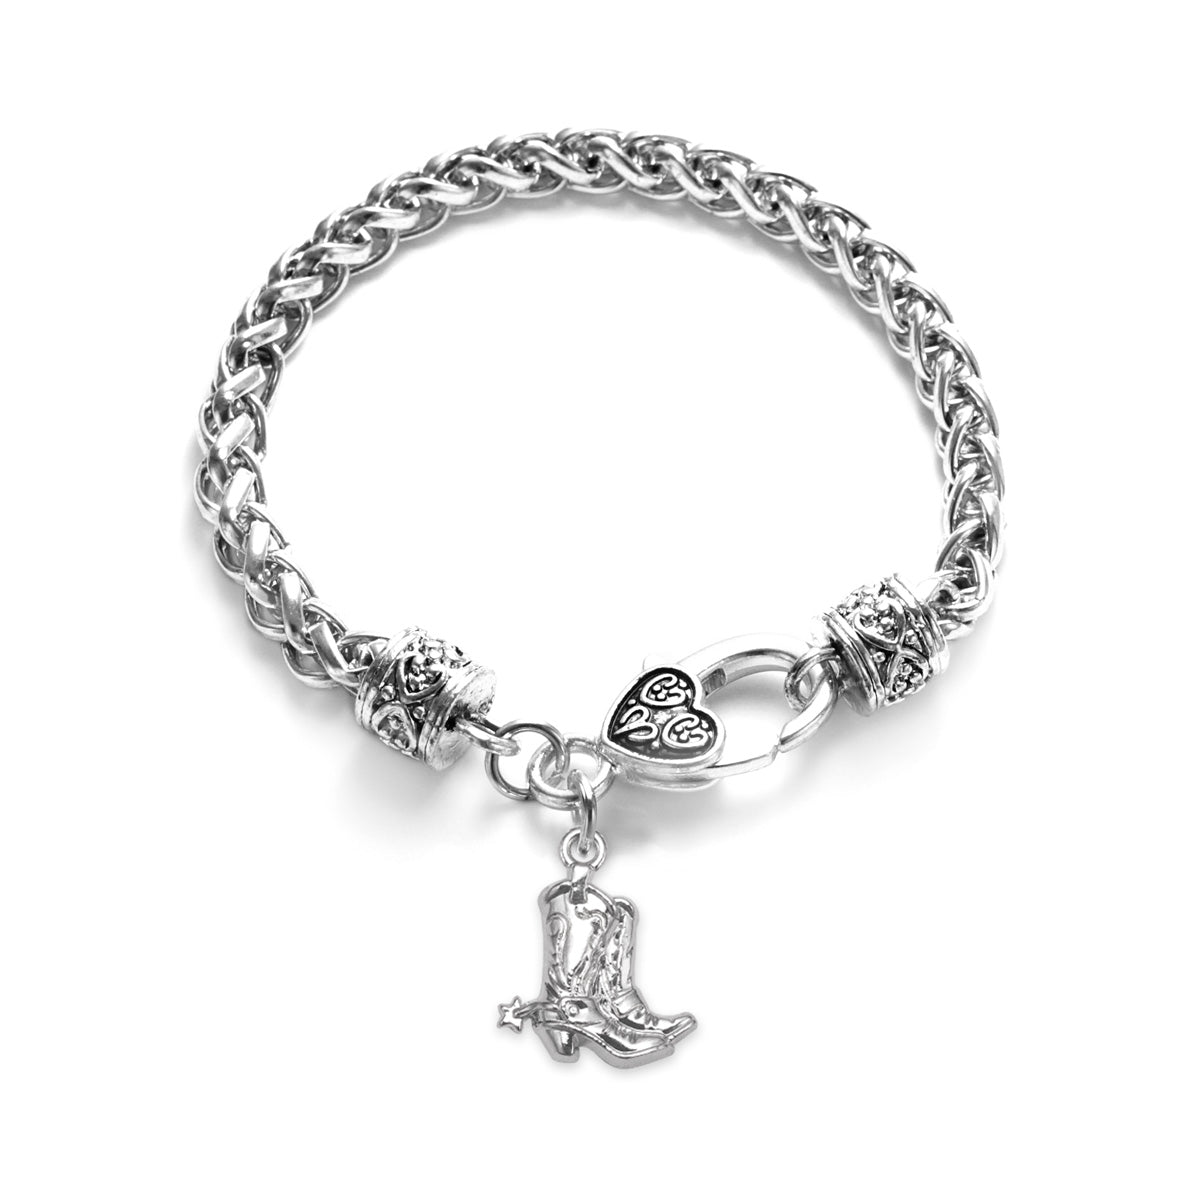 Silver Petite Cowgirl Boot Charm Braided Bracelet